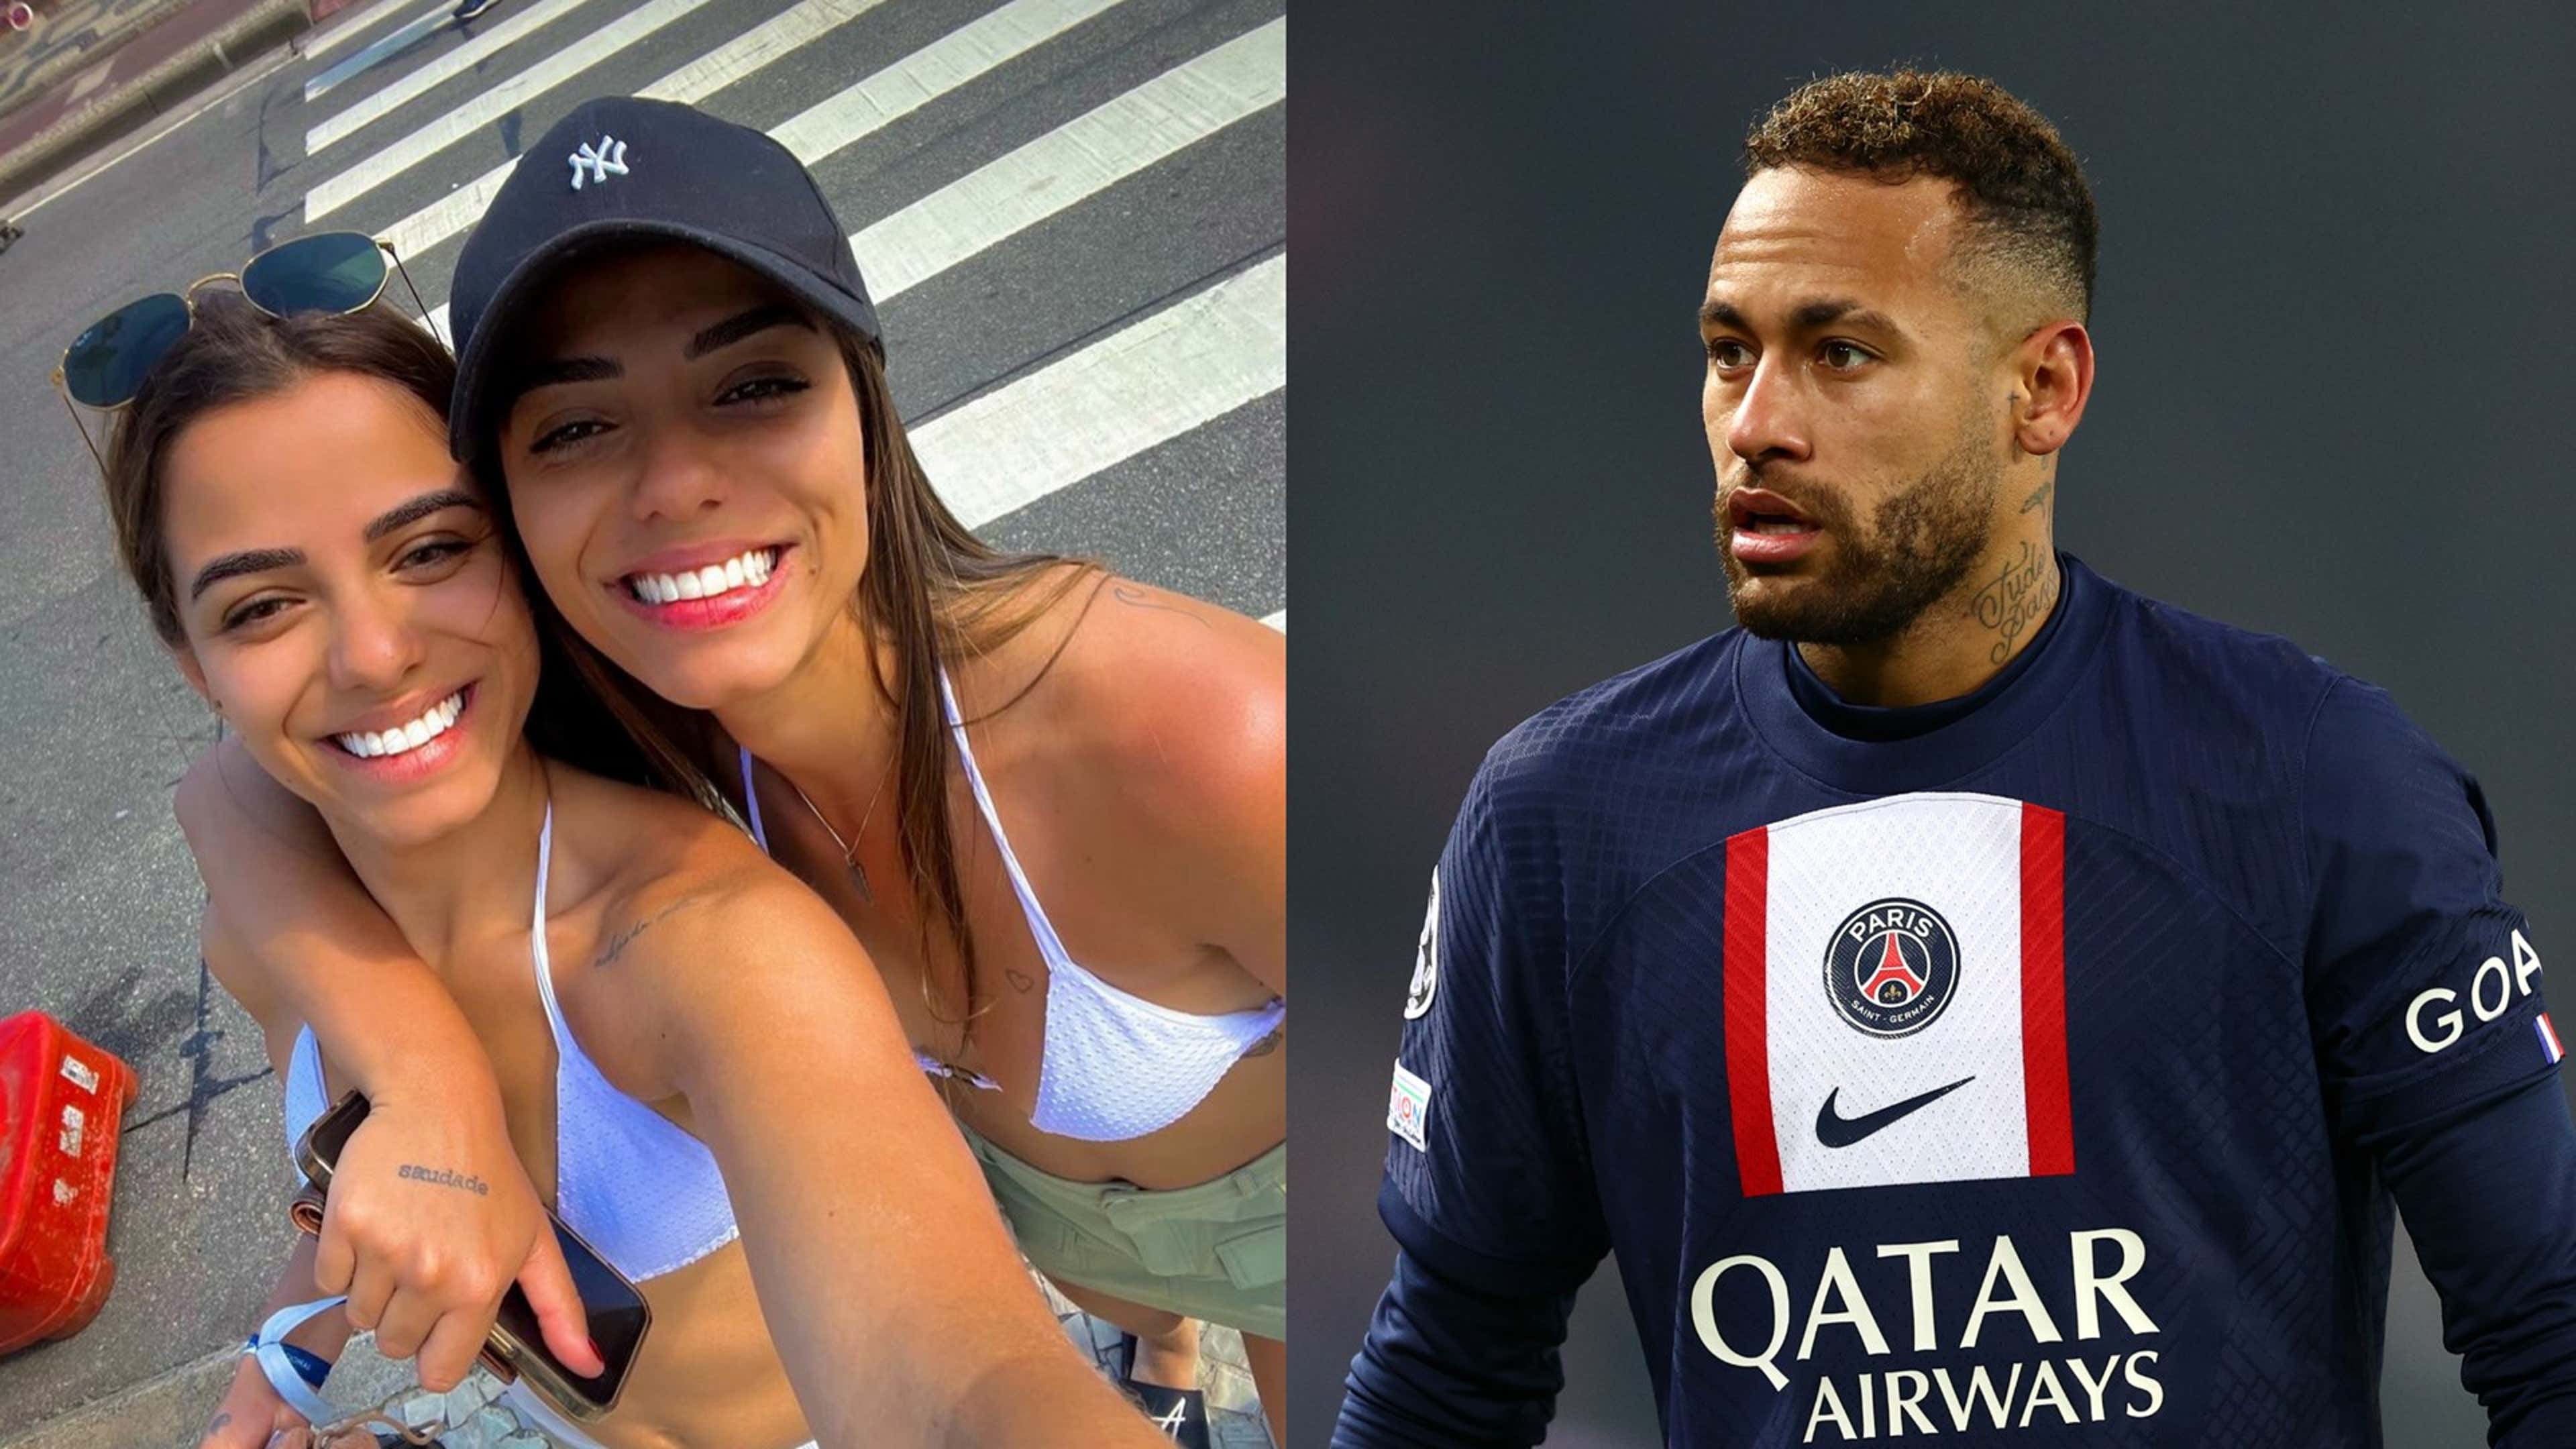 Neymar asked for sex with both of us' - OnlyFans model Key Alves reveals  PSG star's alleged threesome request involving twin sister | Goal.com